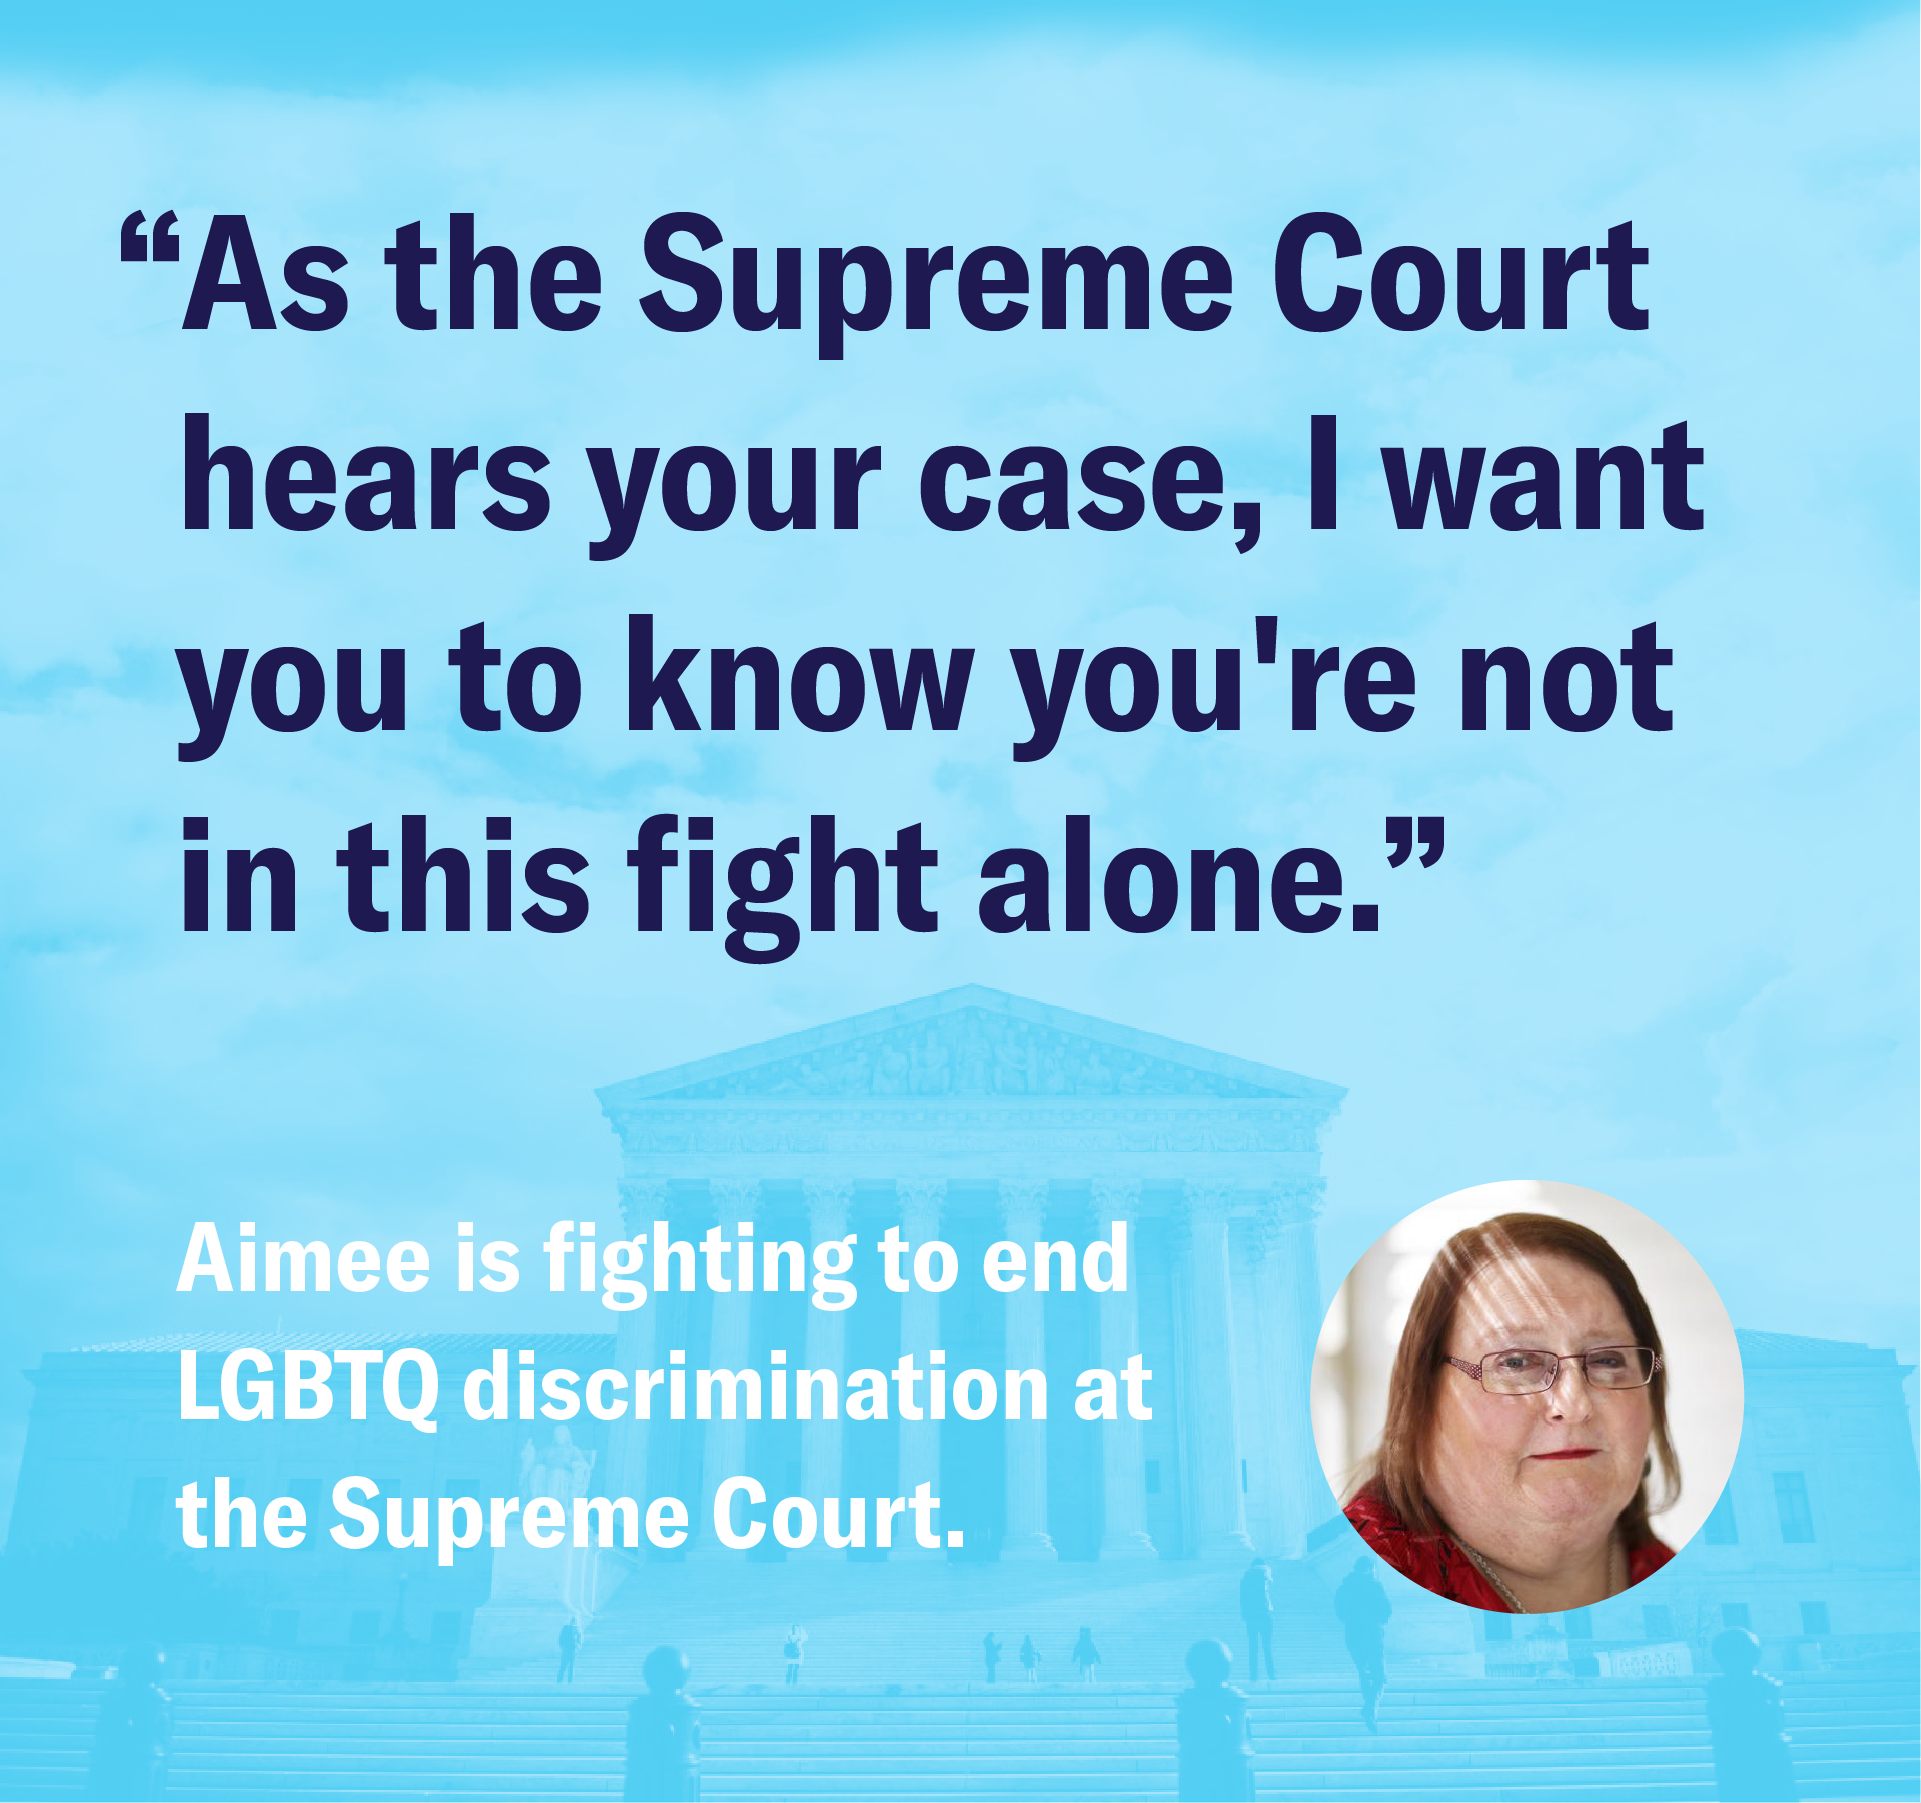 "As the Supreme Court hears your case, I want you to know you're not in this fight alone."